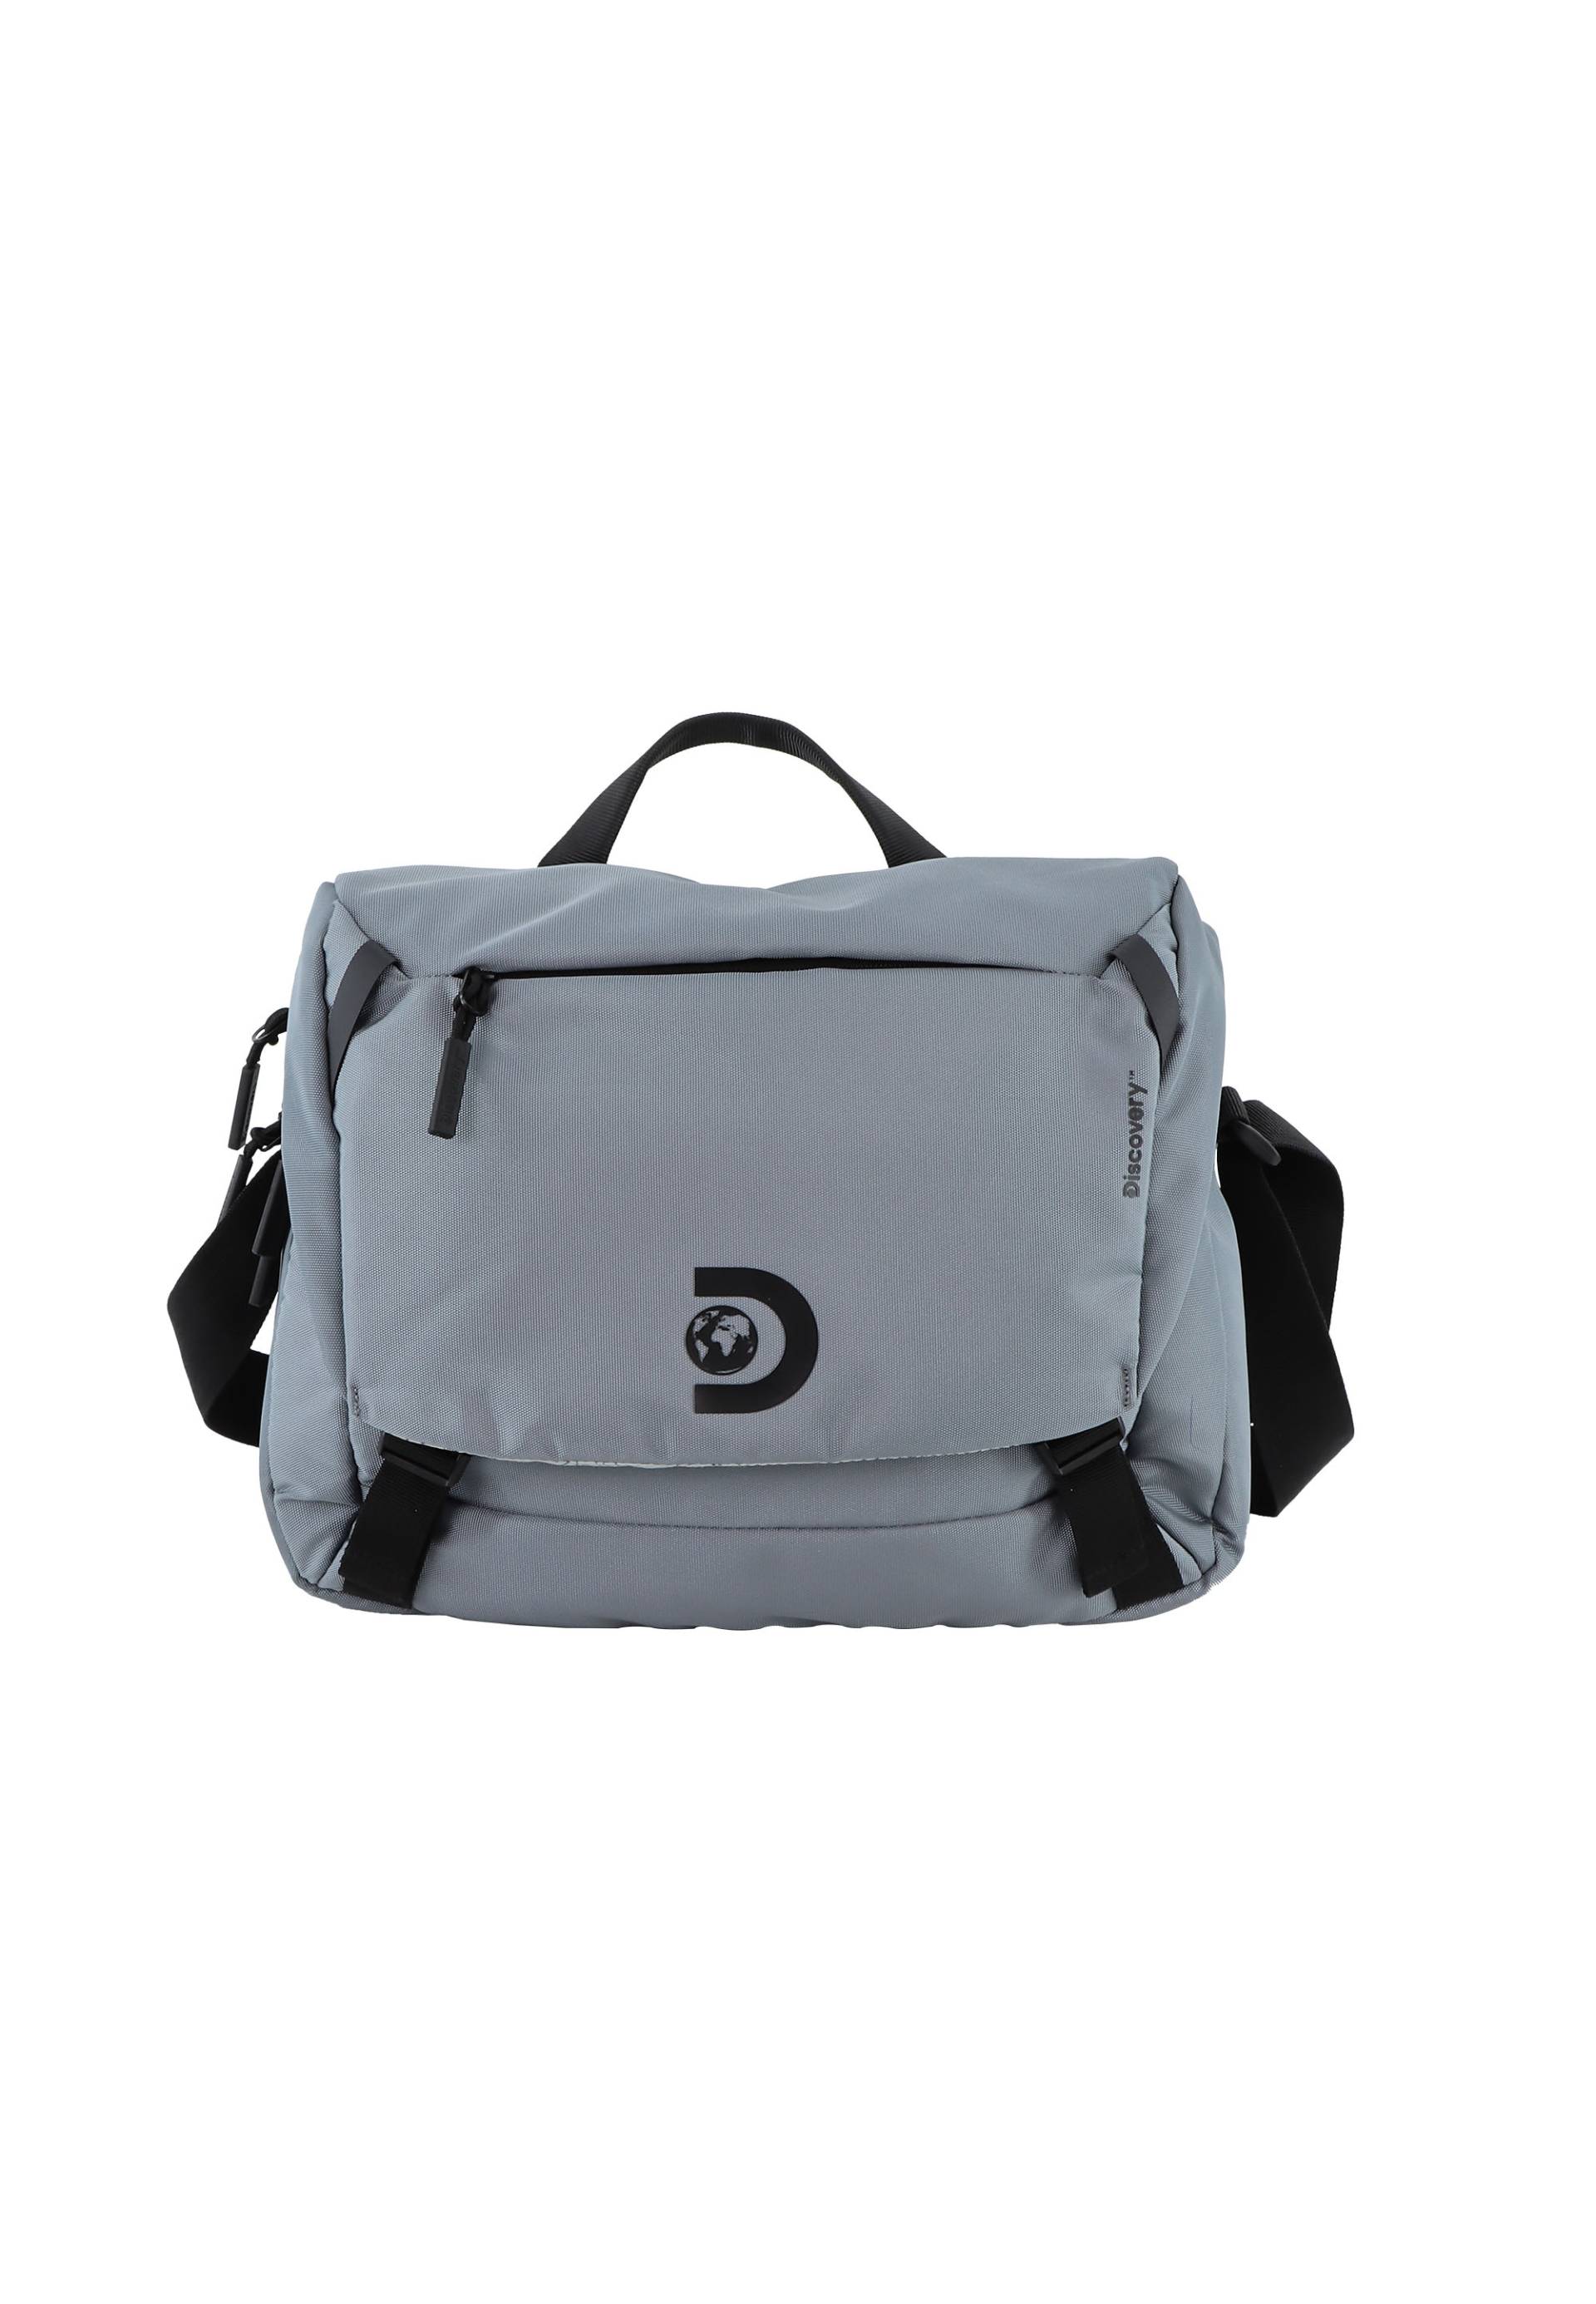 Discovery Schultertasche "Metropolis" von Discovery